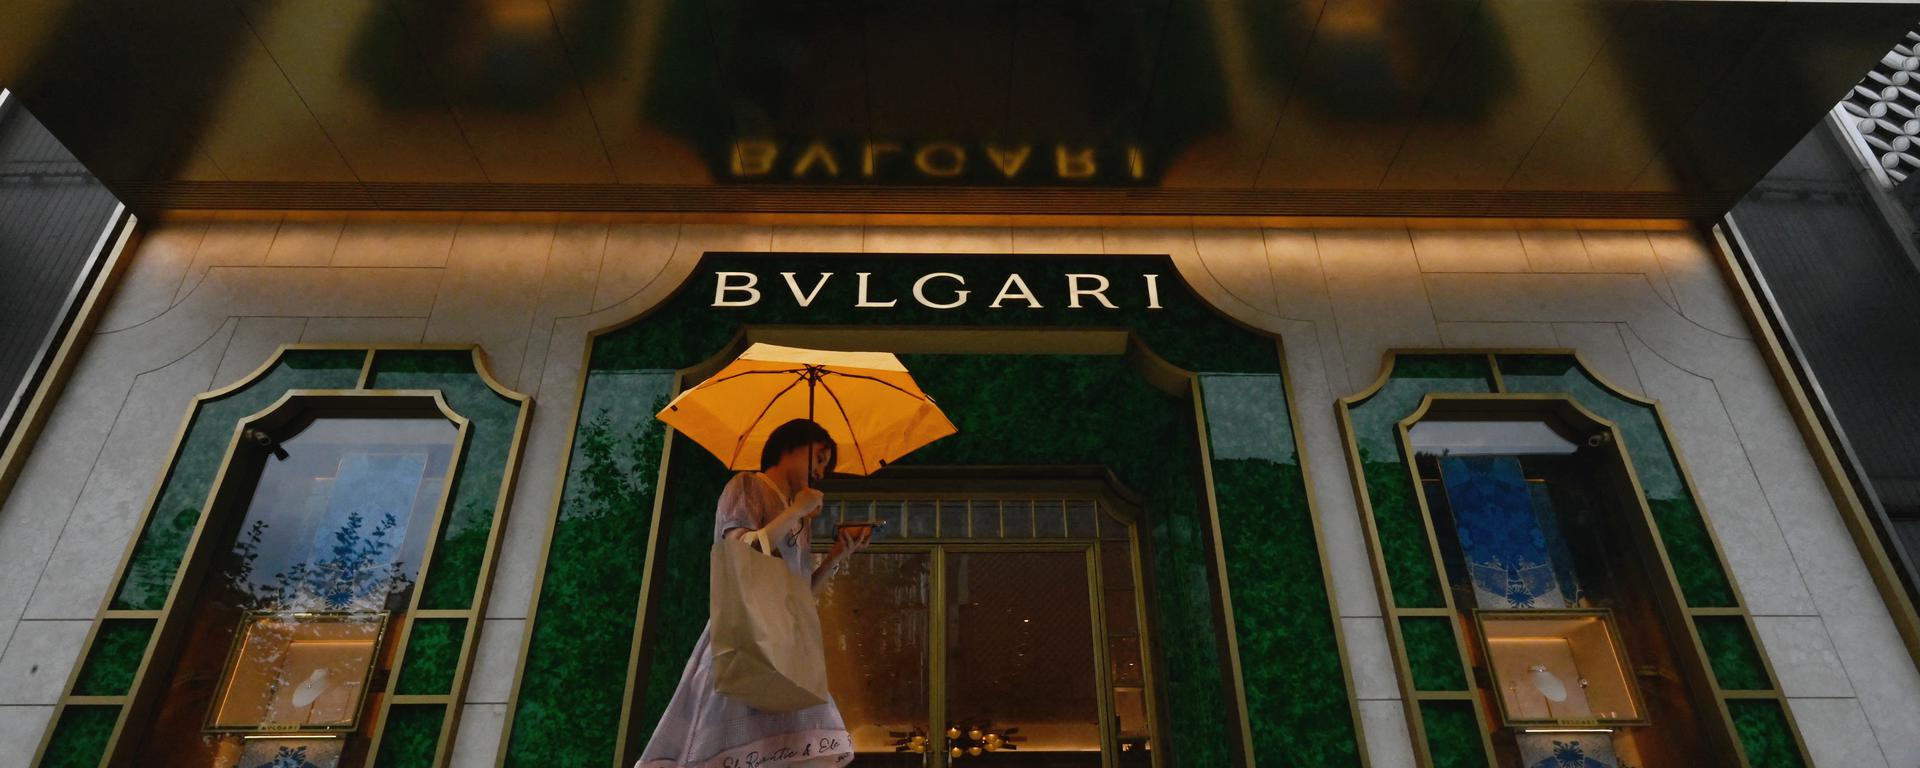 Italian jewelry brand Bulgari apologizes after sparking outrage in China  over Taiwan listing - Global Times